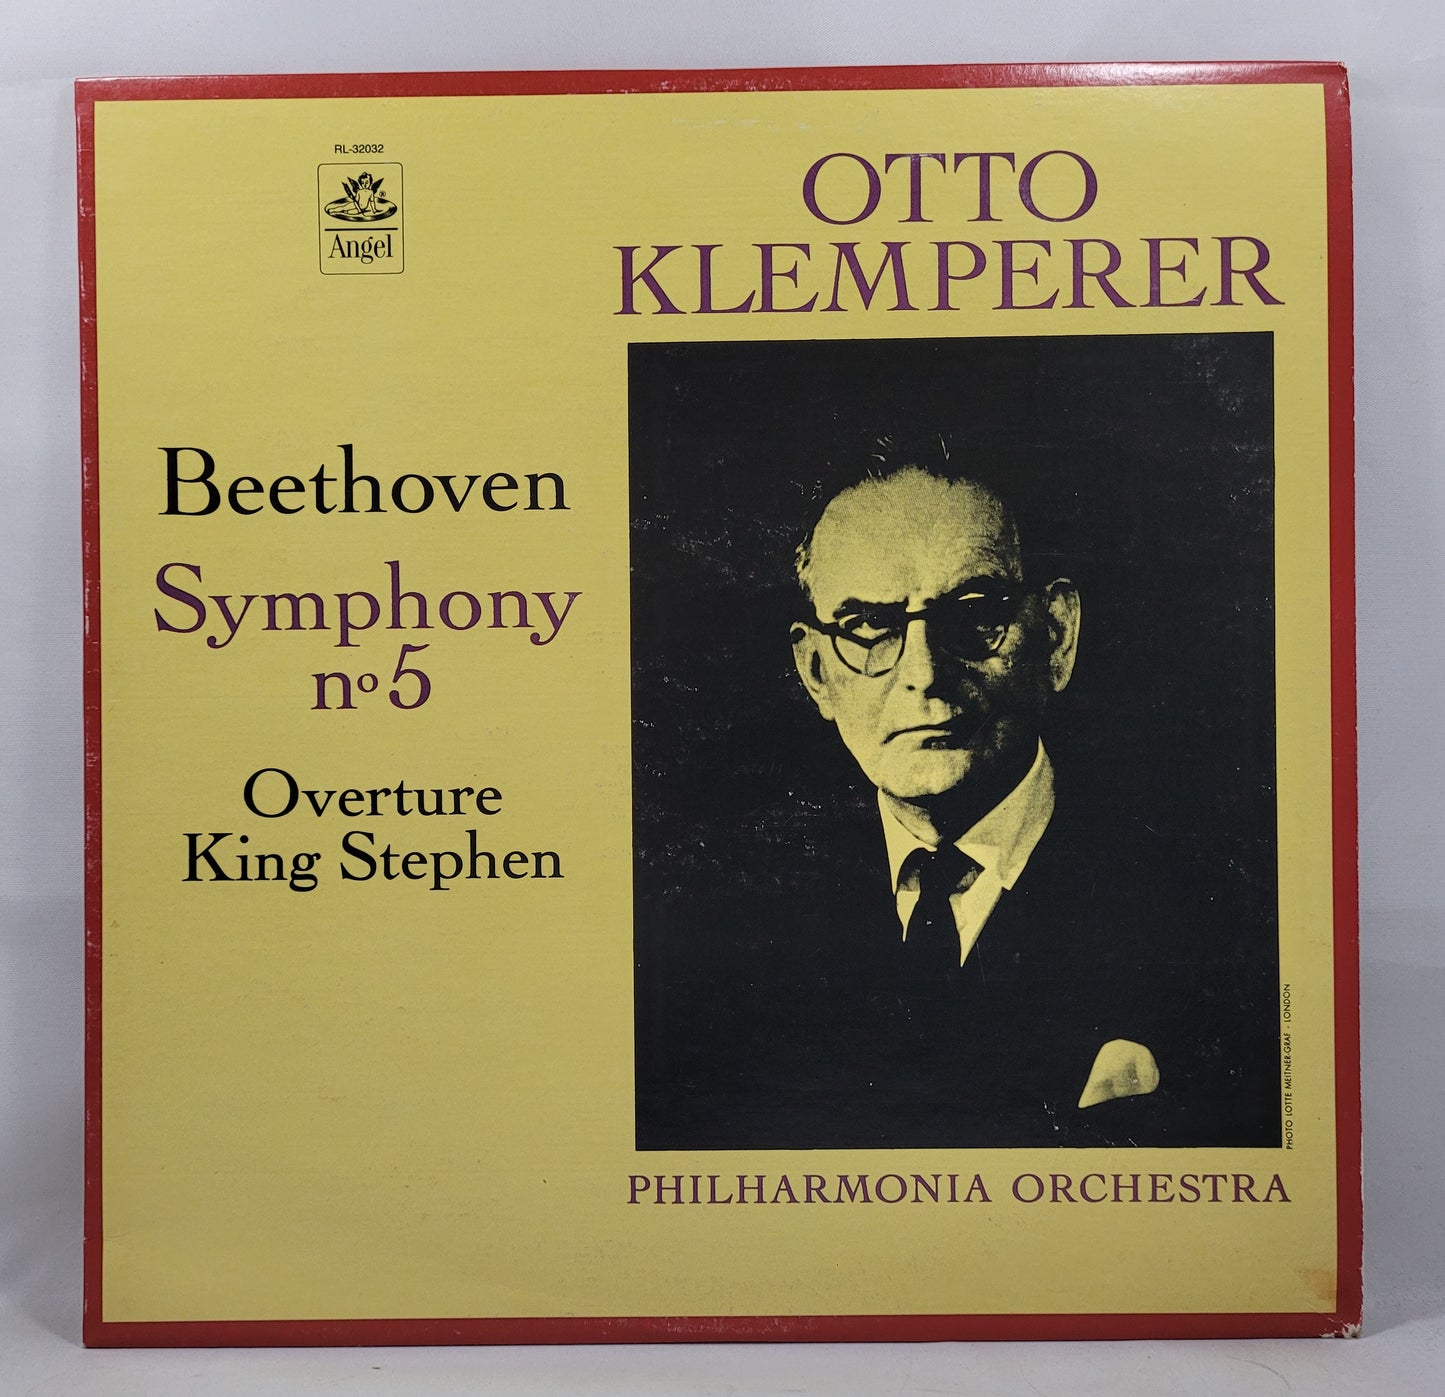 Otto Klemperer - Beethoven Symphony No. 5 [Remastered Used Vinyl Record LP]